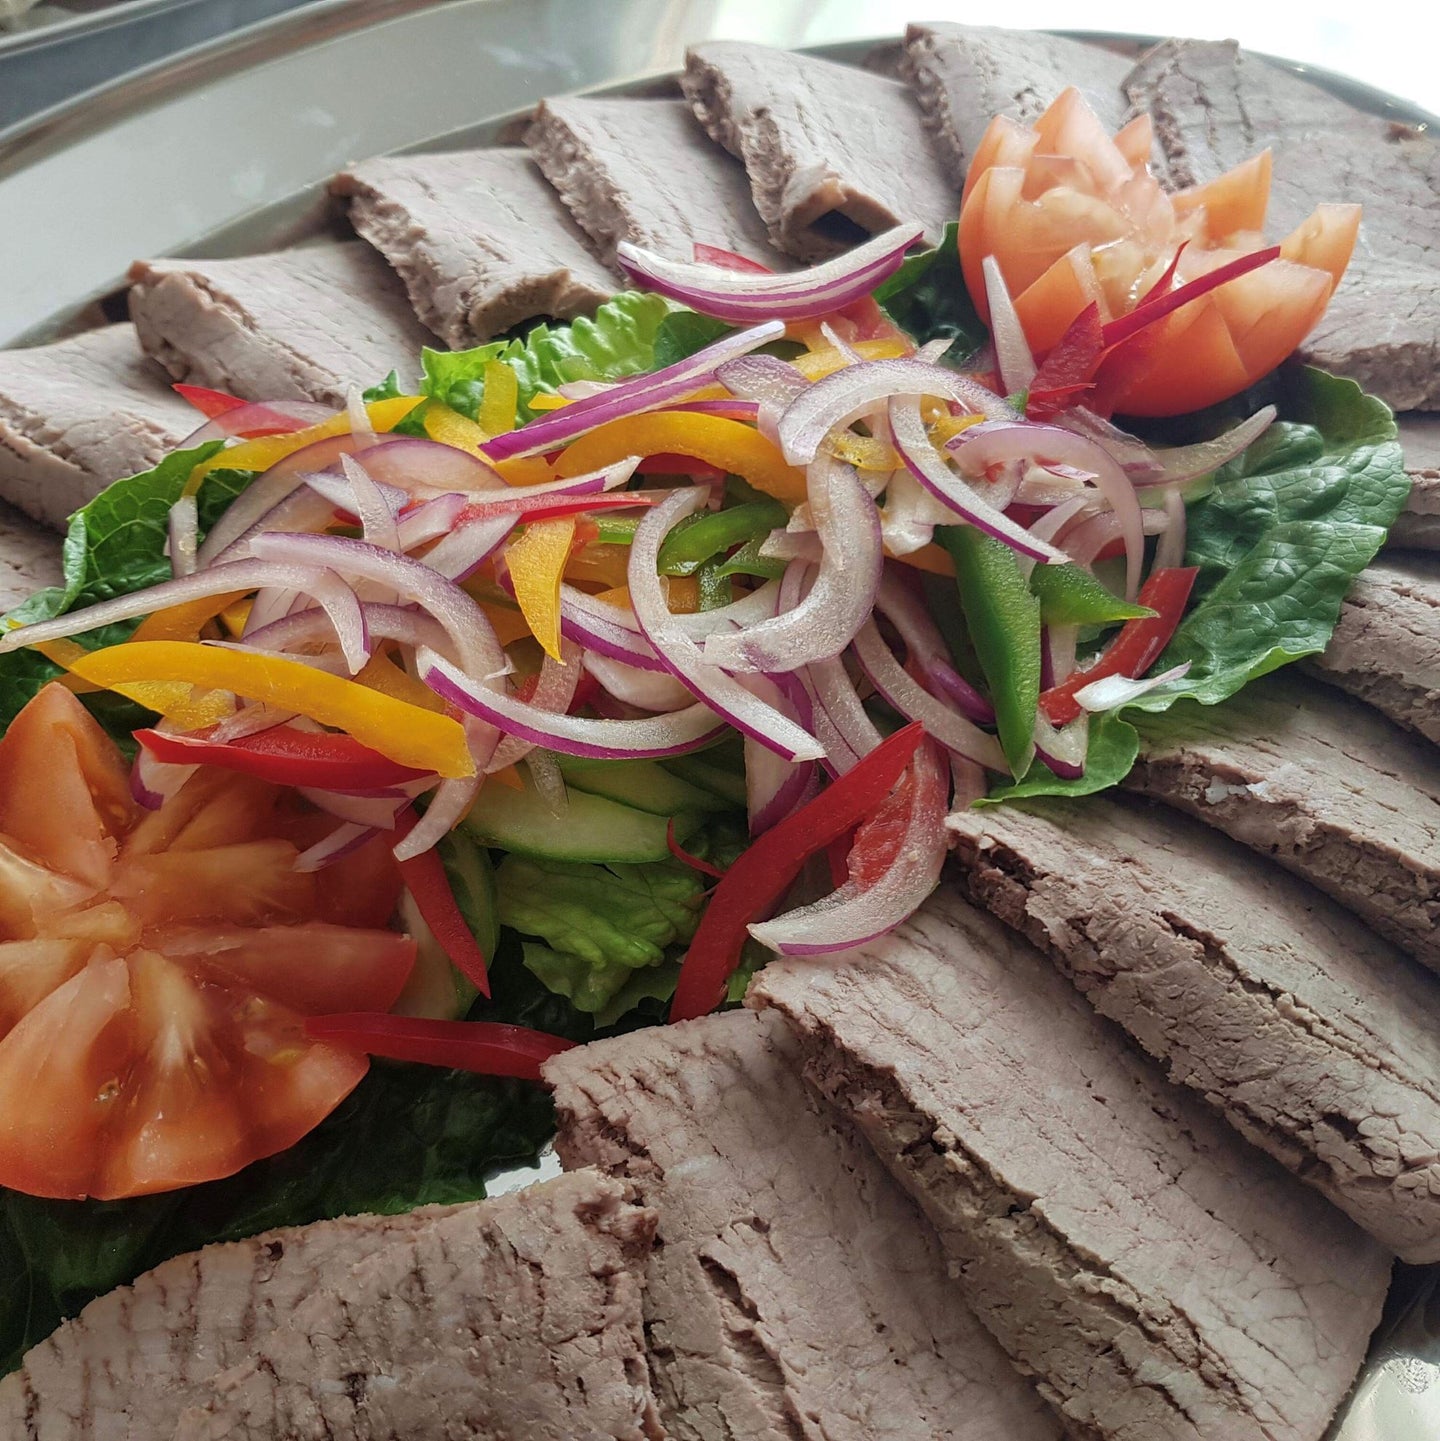 Tray of Roast Beef Slices